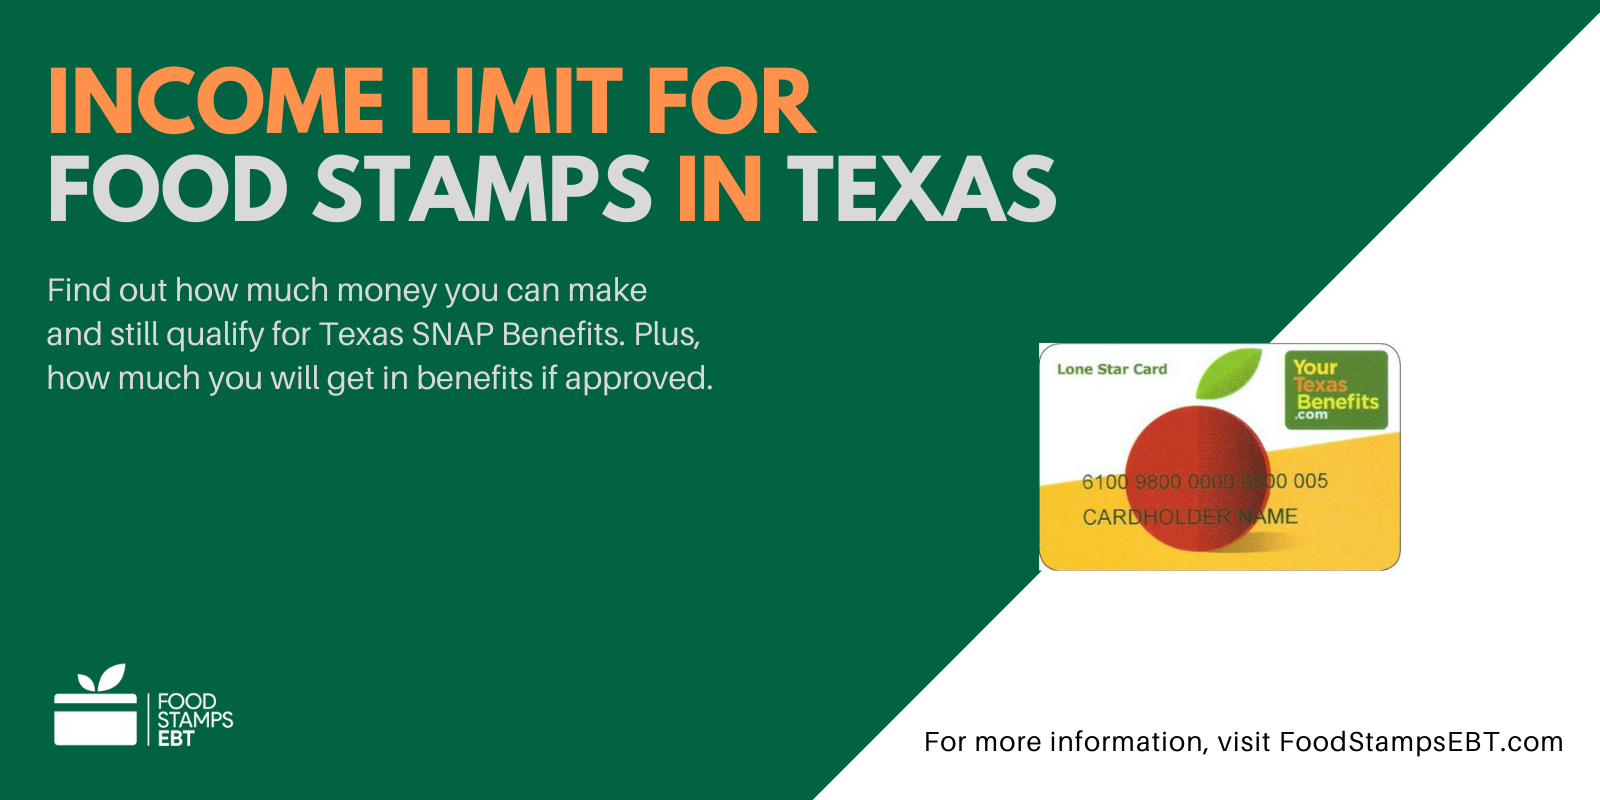 "Income Limit for Food Stamps in Texas"